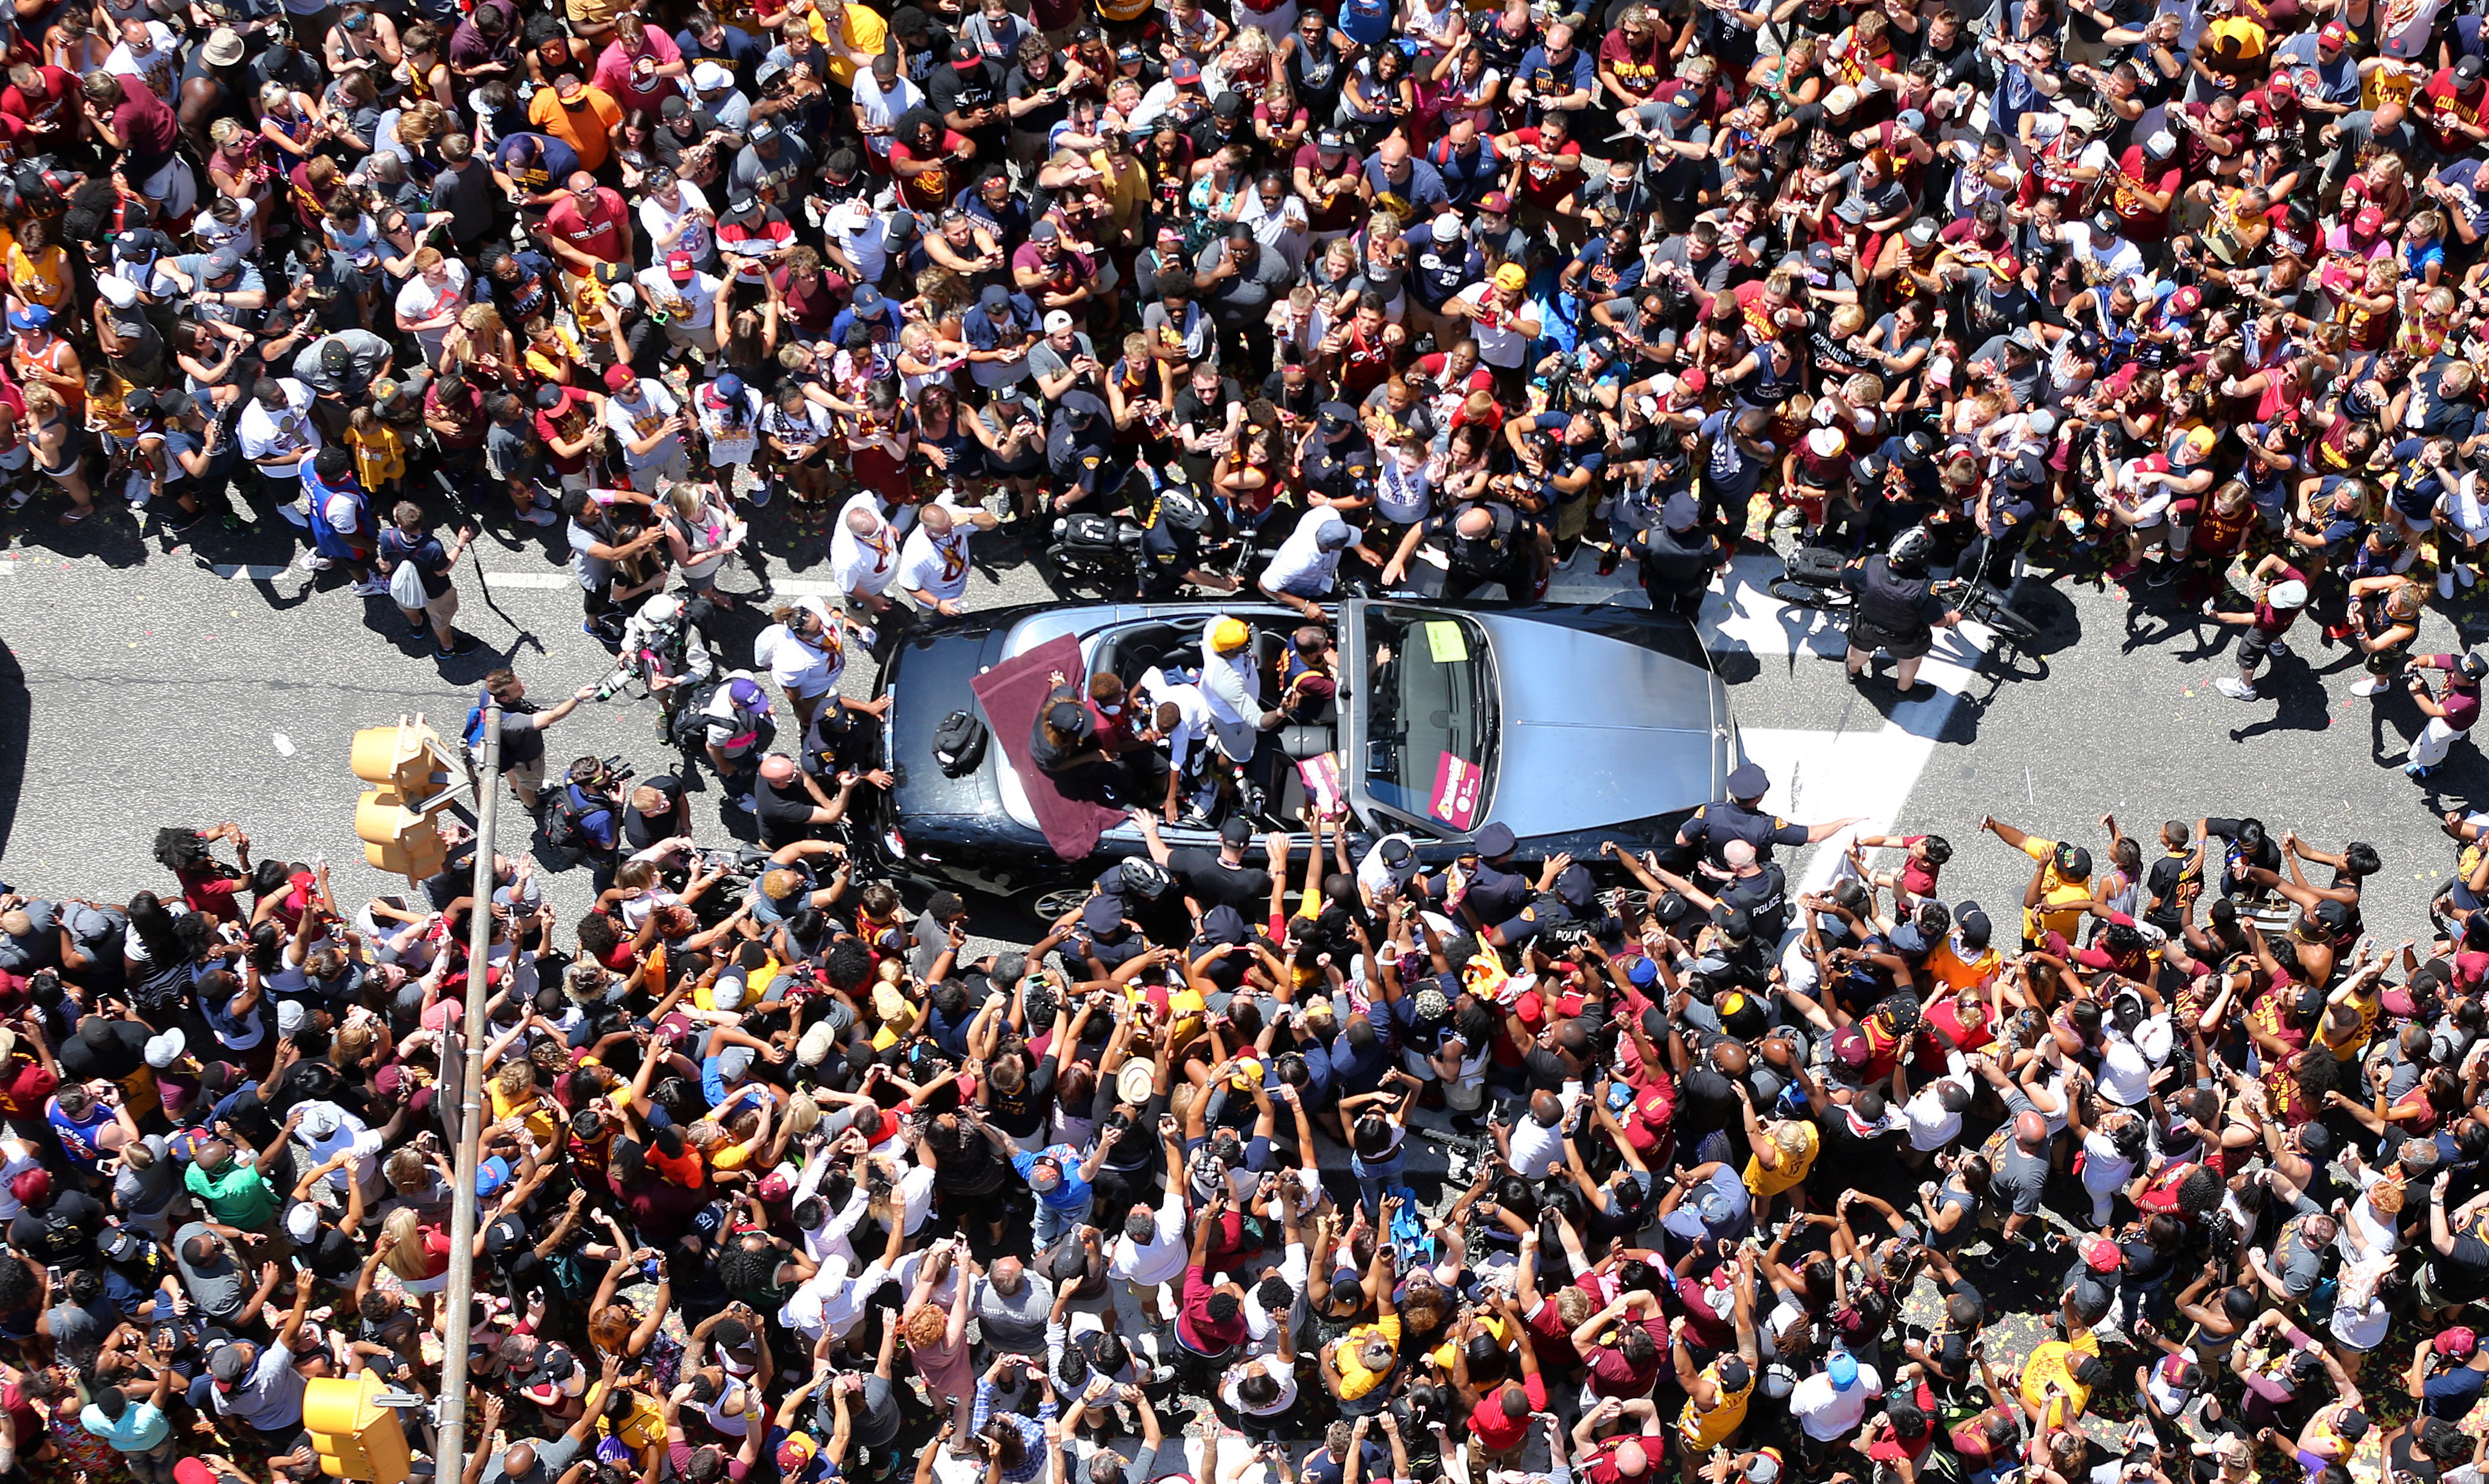 Cleveland Cavaliers forward LeBron James's Rolls Royce is swarmed by fans during a parade in downtown Cleveland to celebrate and honor the 2016 NBA Champion Cleveland Cavaliers.    Joshua Gunter, cleveland.com June 22, 2016. Cleveland. 